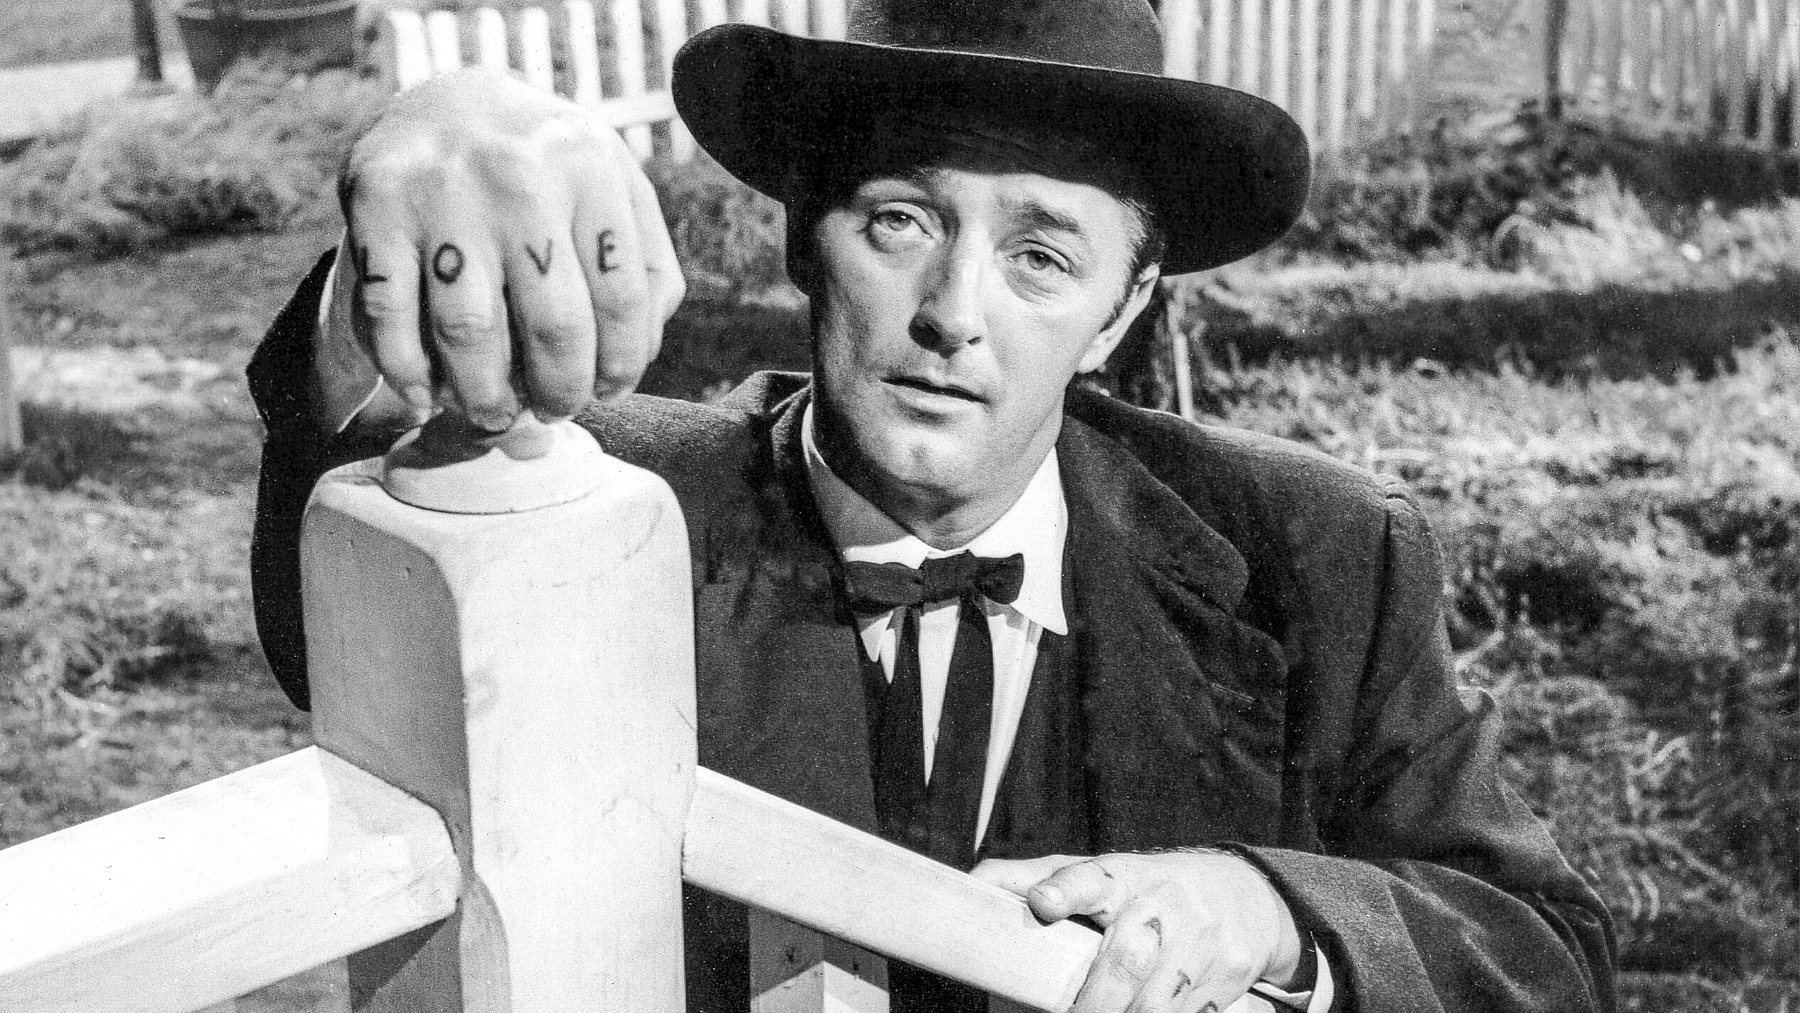 Harry Powell (Robert Mitchum, is looking up from below the porch and holding on to the balustrade. The famous LOVE and HATE tattoos are showing clearly on the back of his fingers.